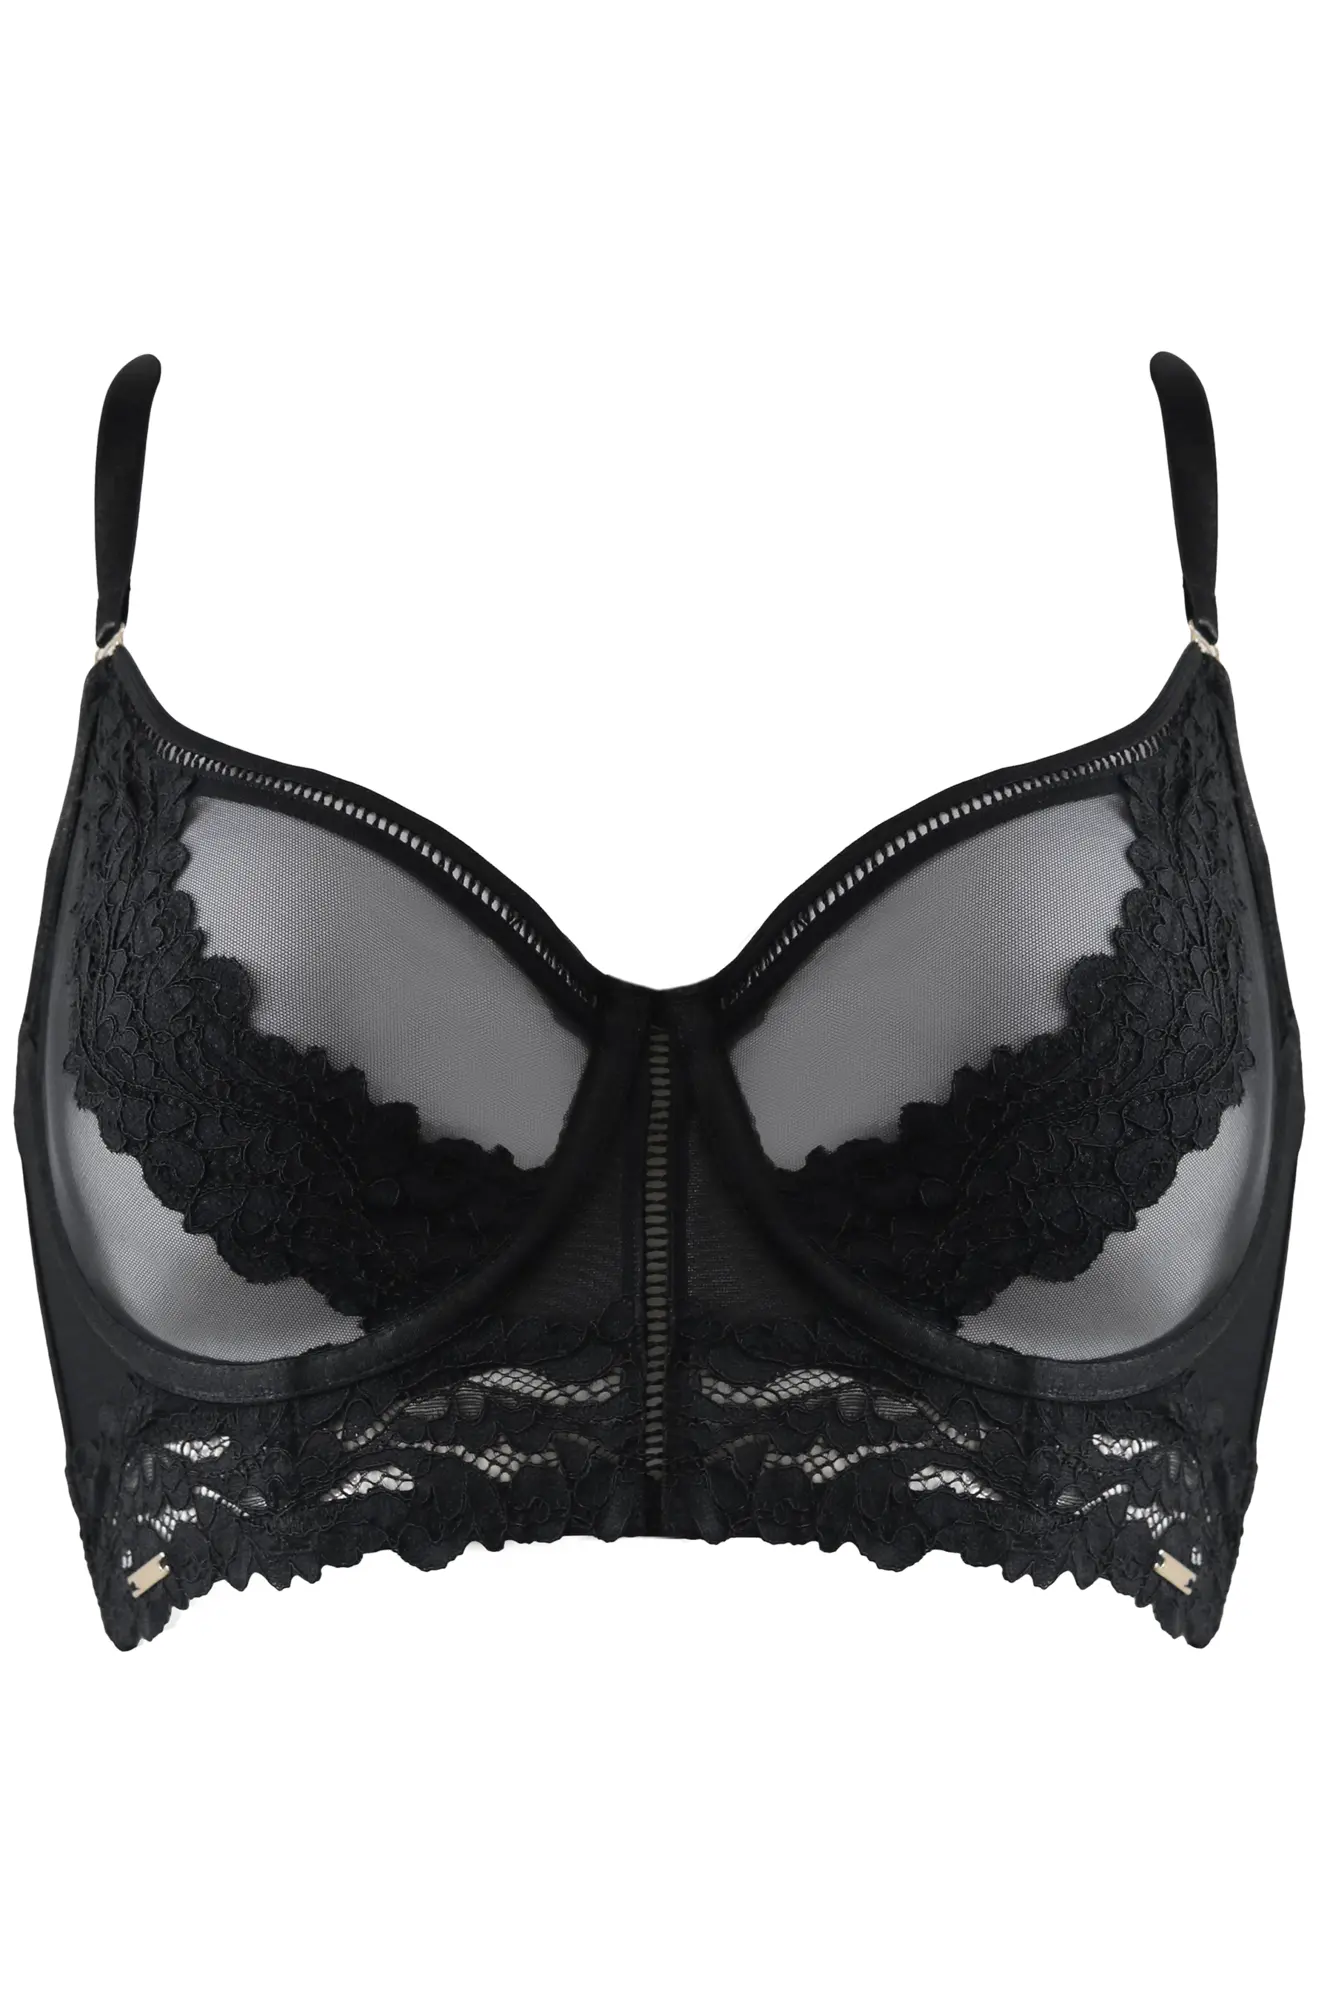 India Lace and Mesh Underwired Bustier | Black | Pour Moi